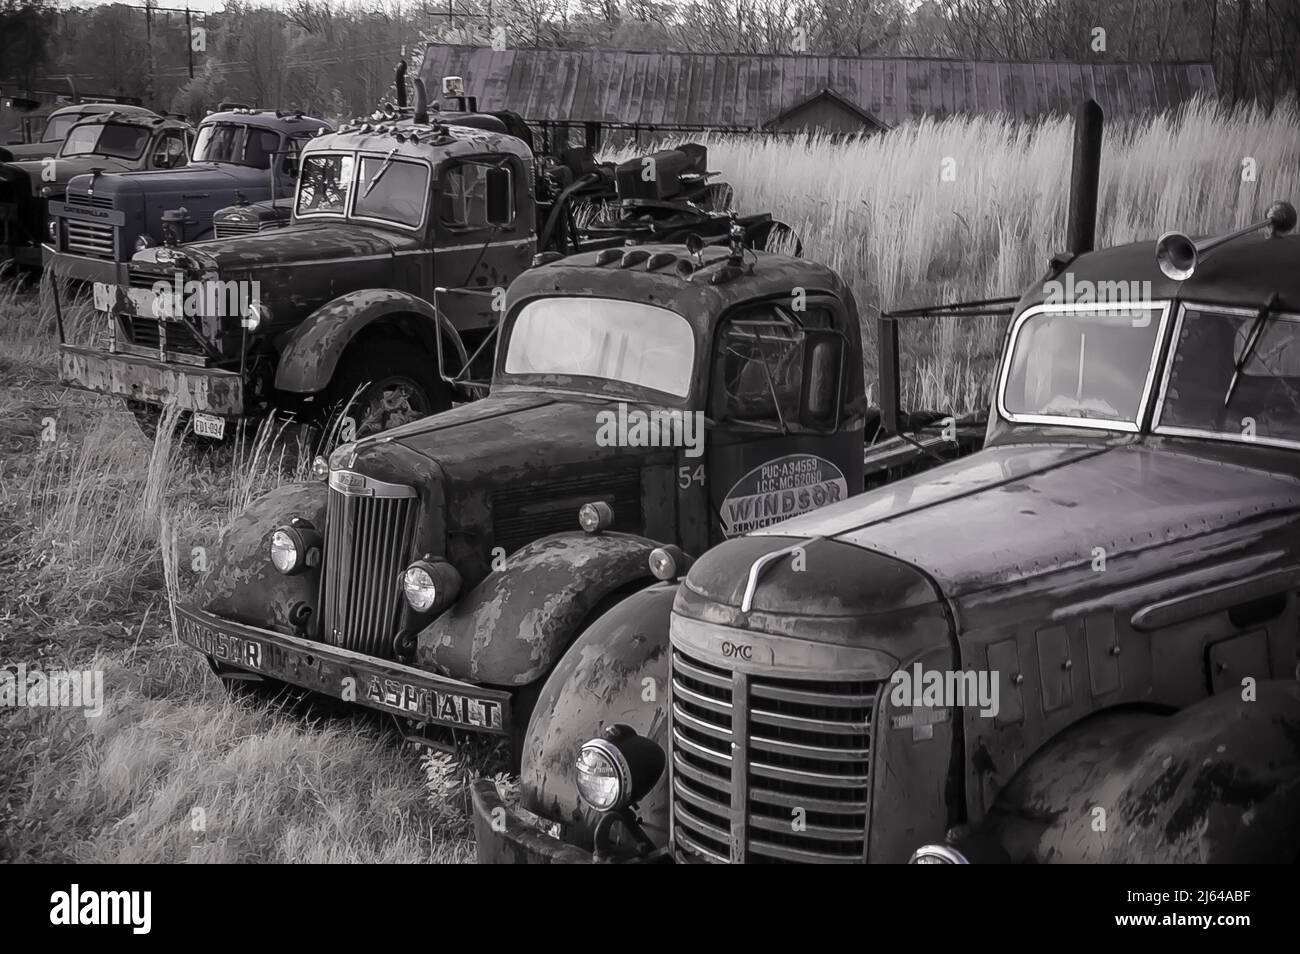 A collection of old abandoned trucks sit in a field of grass Stock Photo